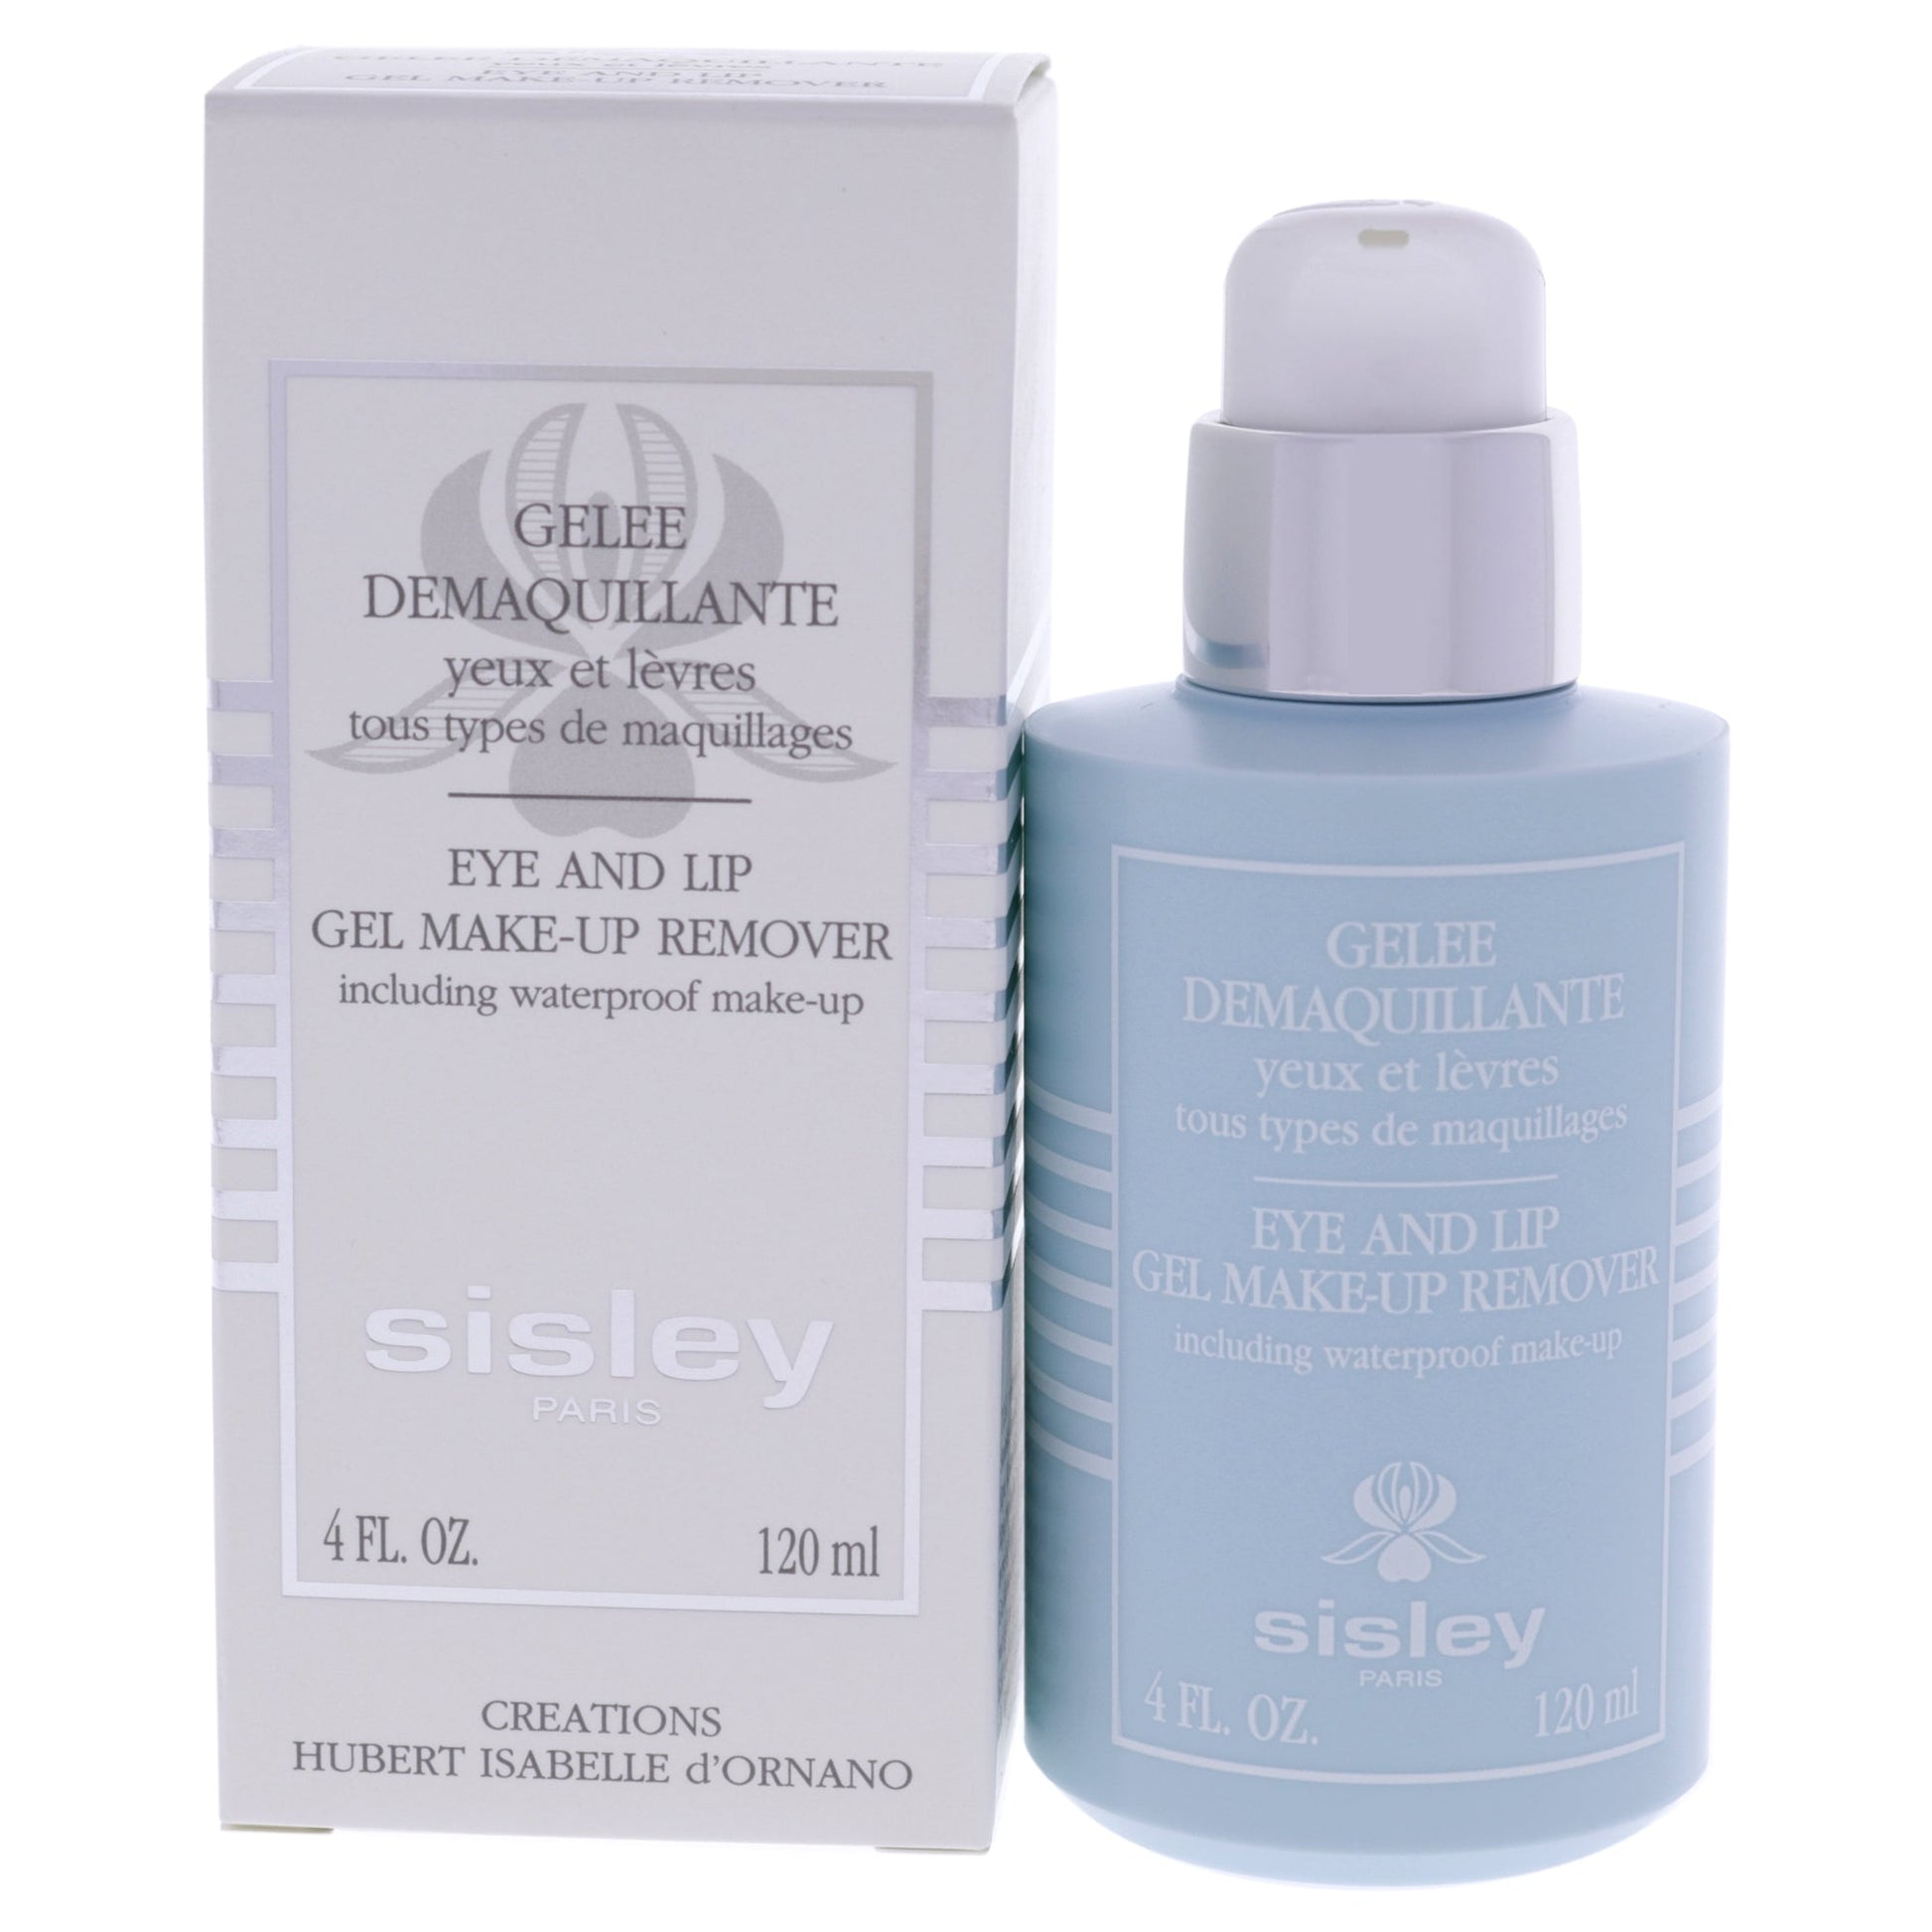 Gentle Eye & Lip Gel Make-Up Remover by Sisley for Women - 4.2 oz Makeup Remover, Product image 1